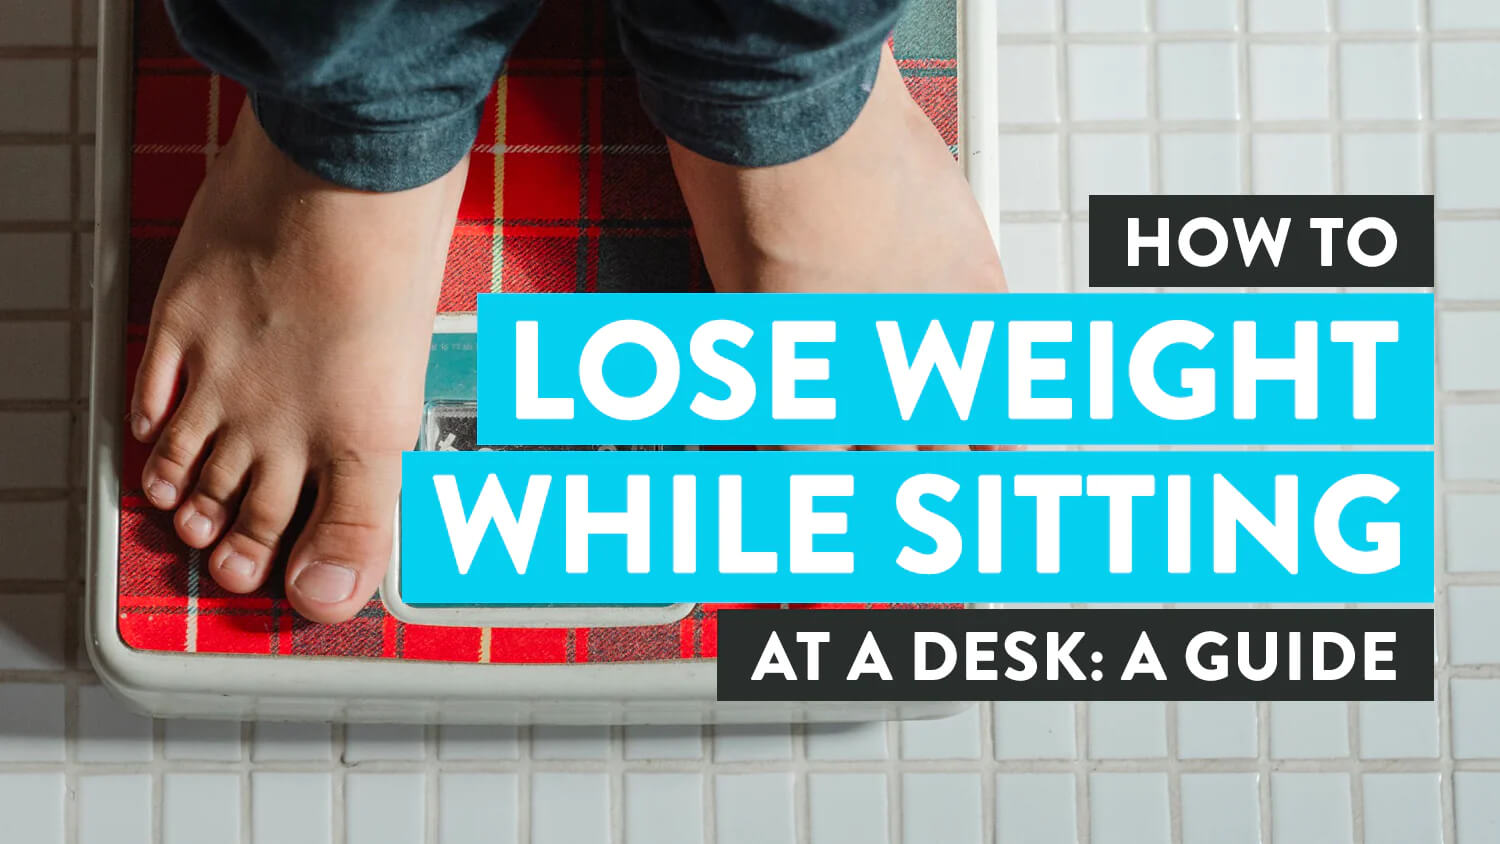 Everything You Need to Know to Lose Weight at Your Desk: Health